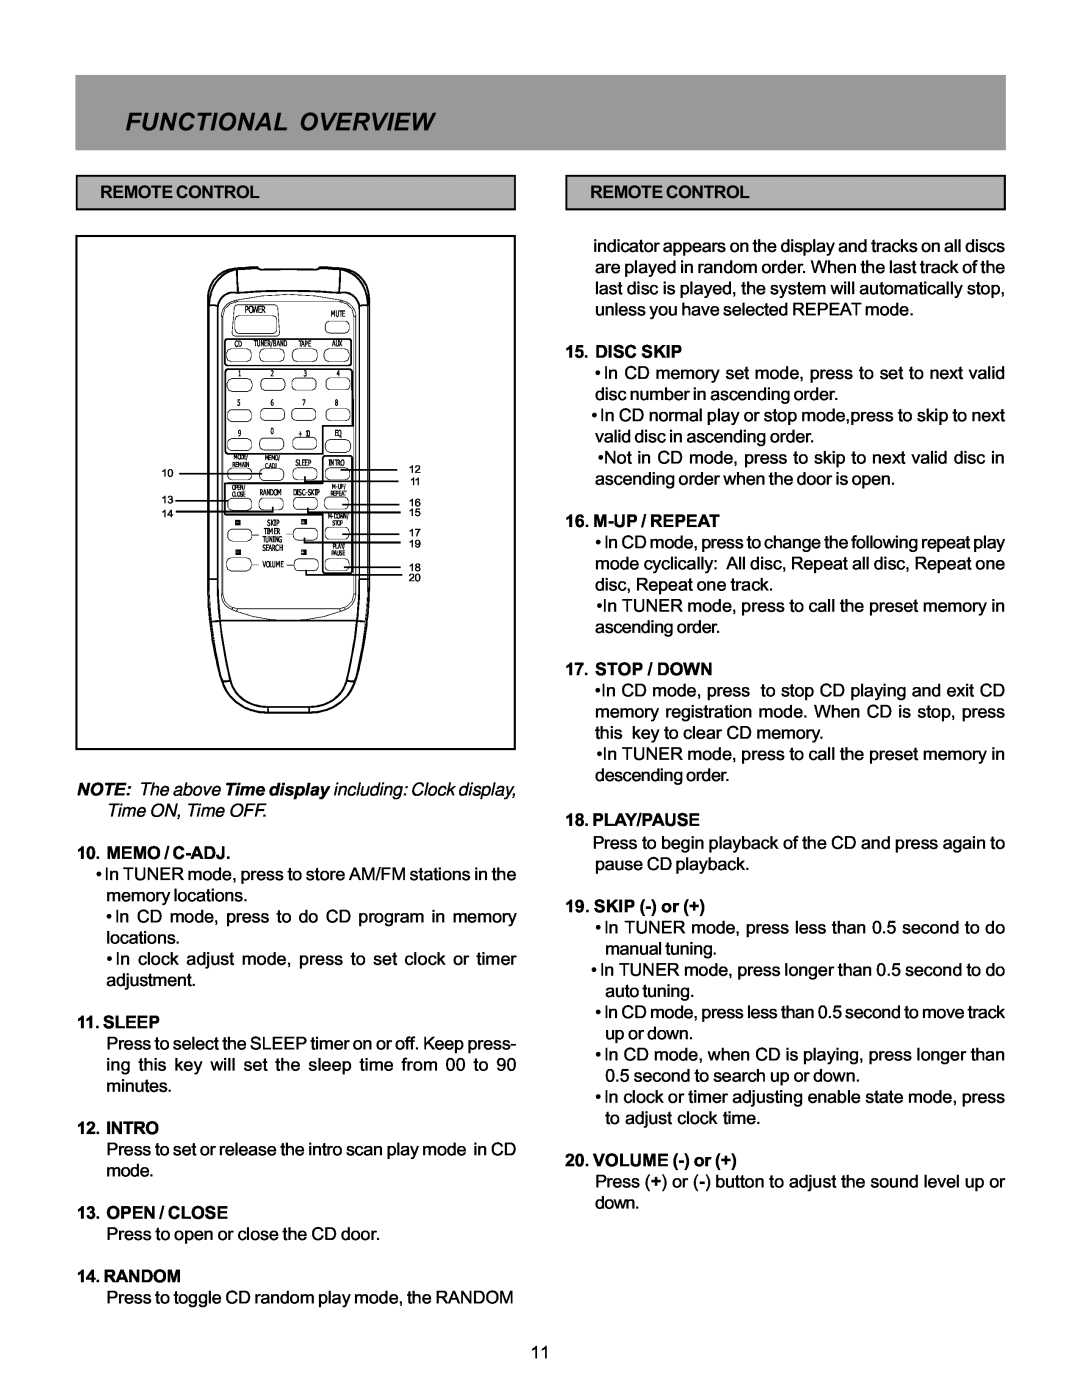 Memorex MX5520SPKA manual Functional Overview, Remote Control 